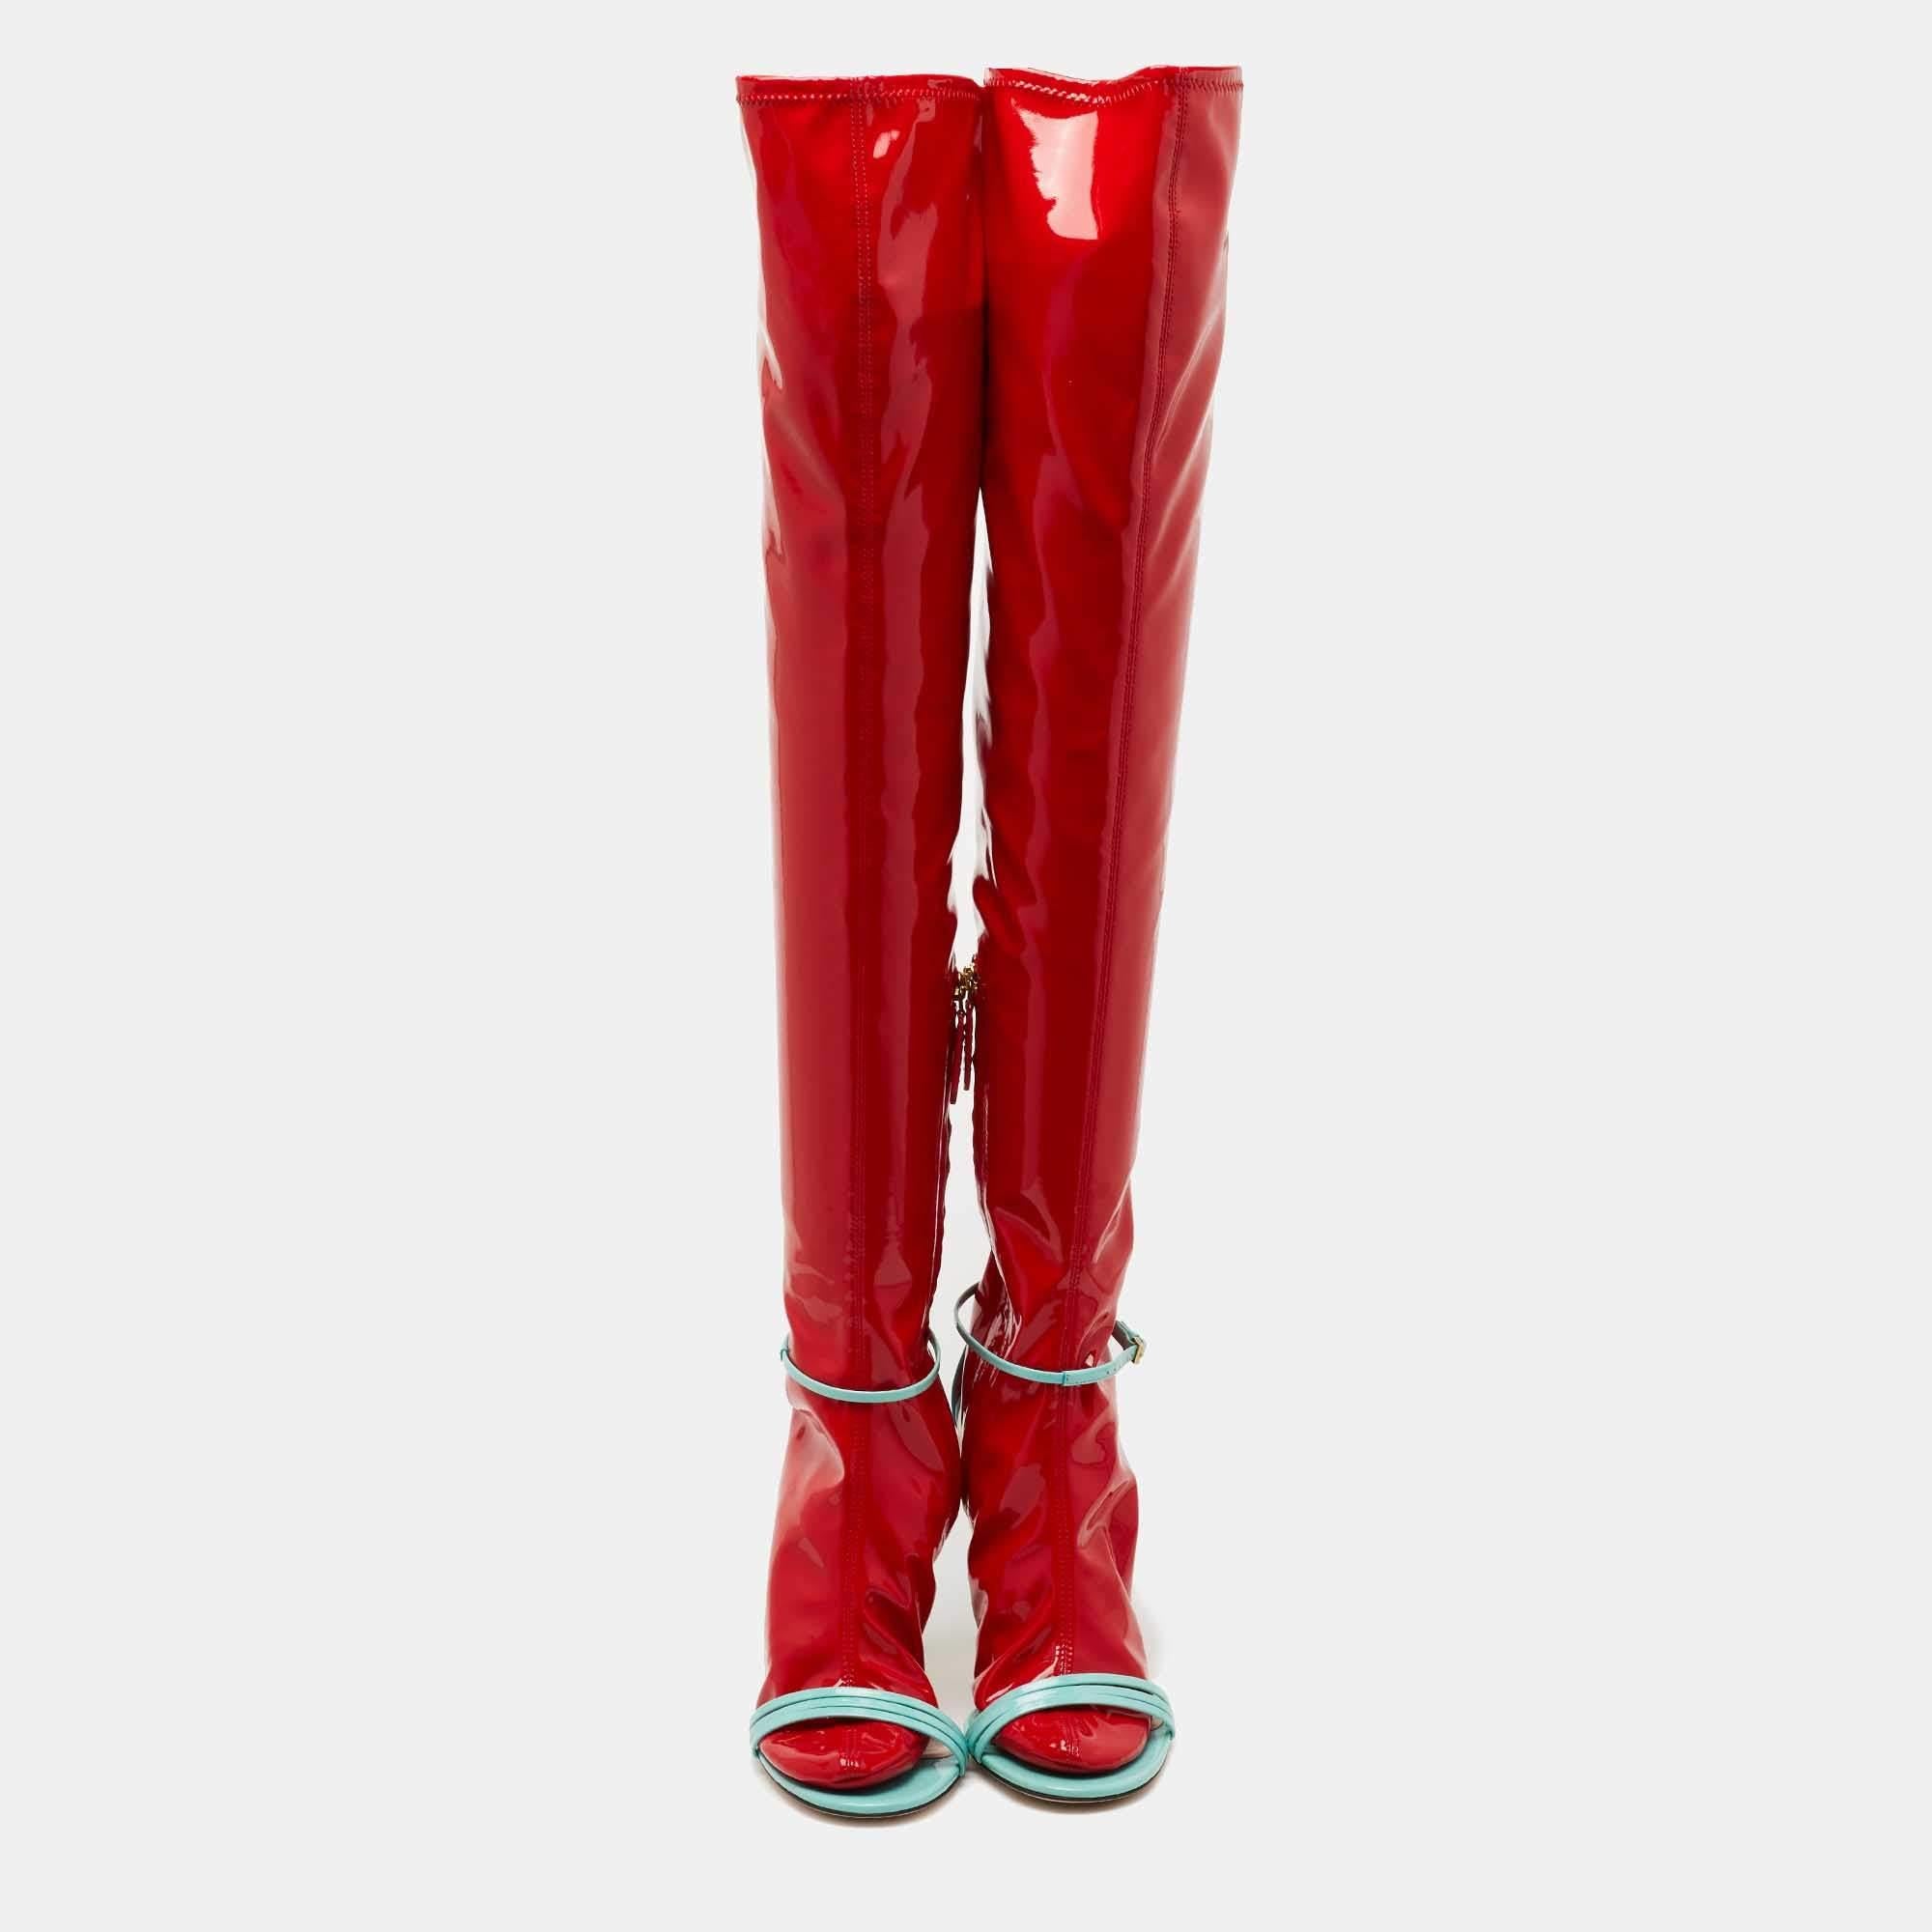 Gucci shows us how to make an entrance with these Lugh latex sock sandals. Fashioned in PVC and patent leather, the knee-length shoes are as bold as they're beautiful.

Includes: Original Dustbag, Original Box

